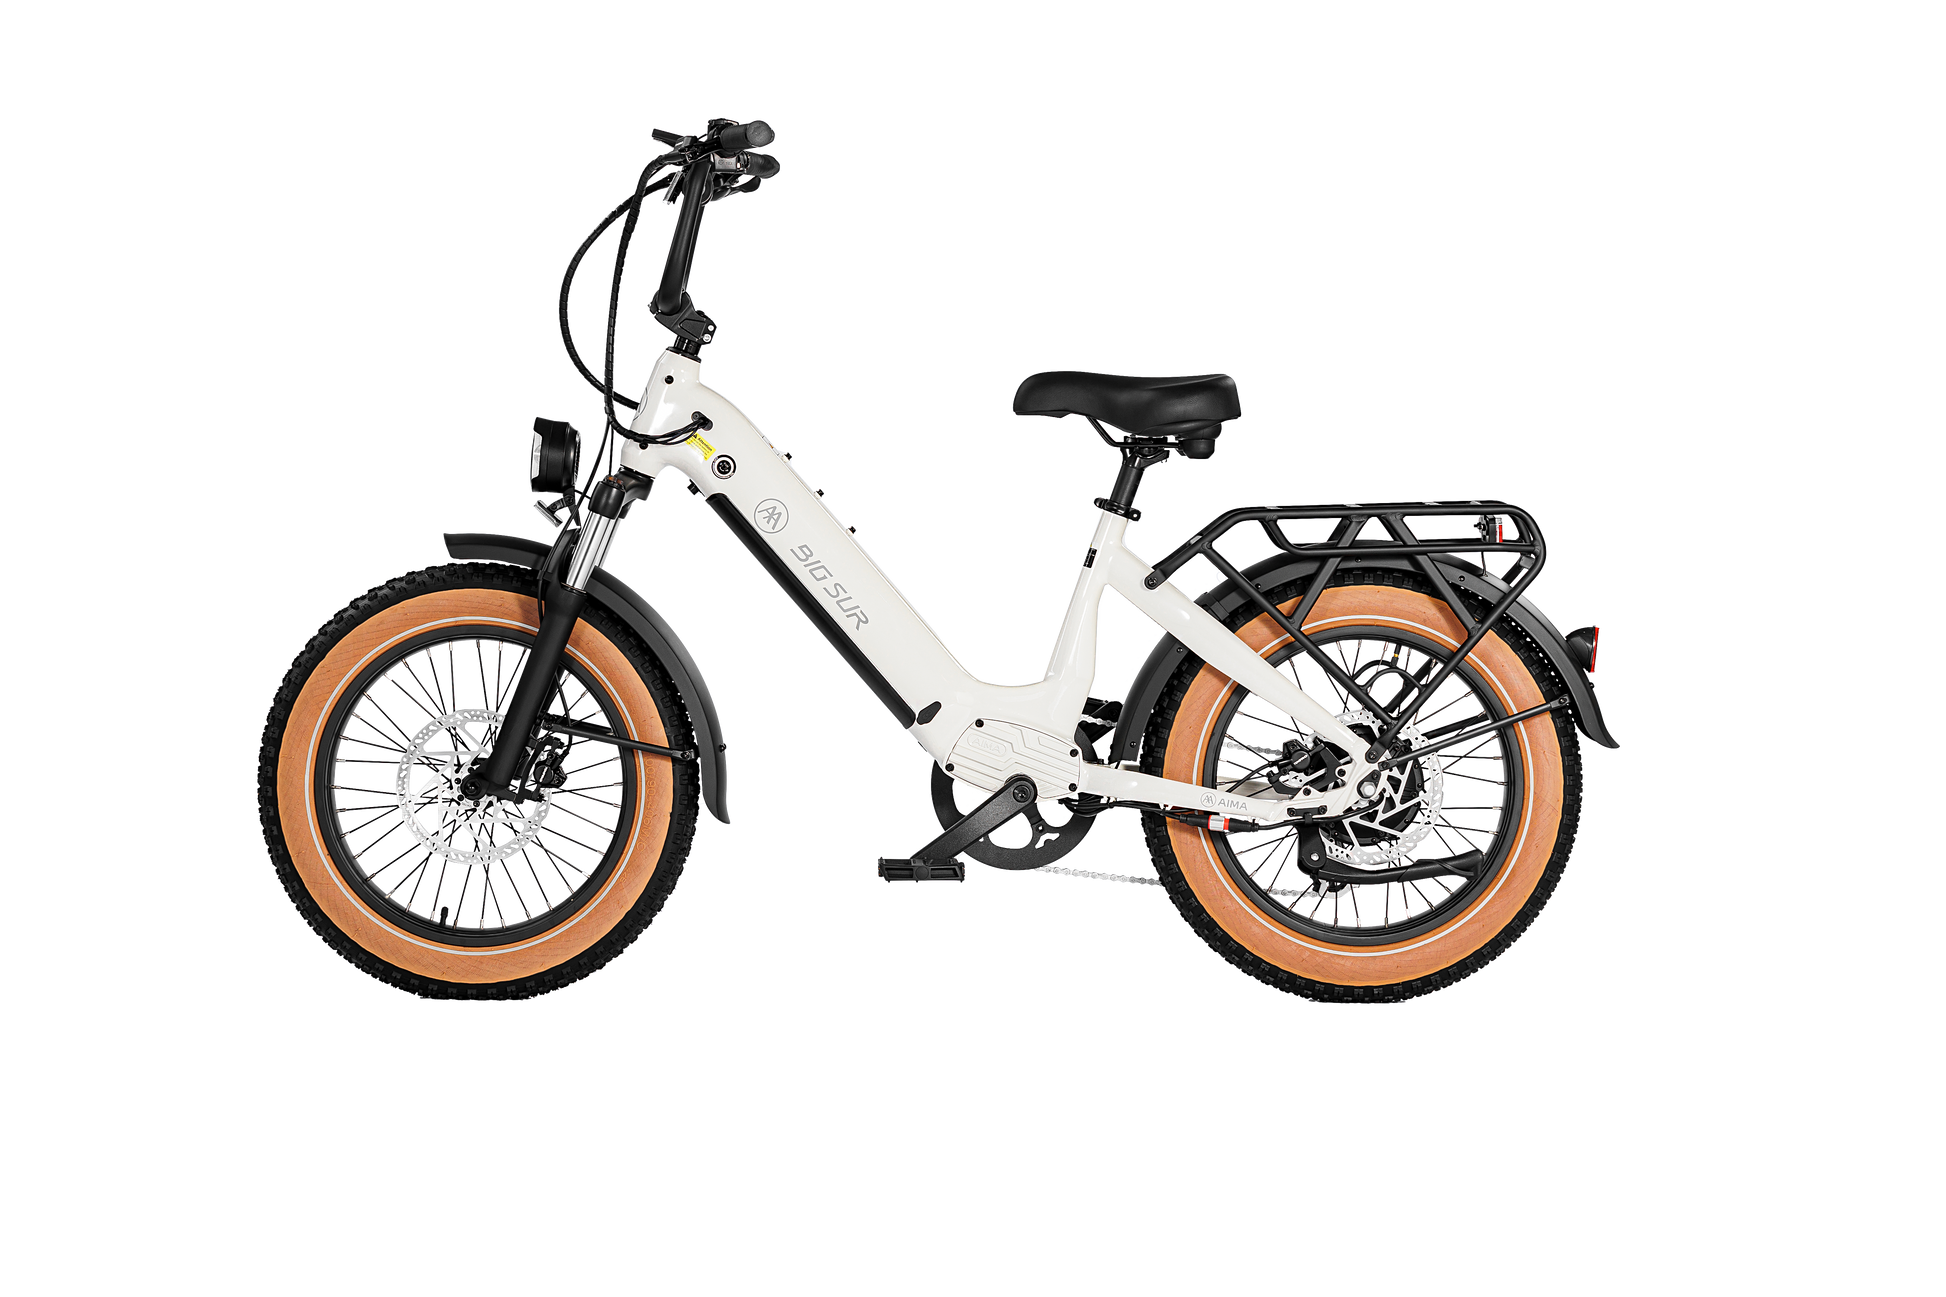 A white AIMA - Big Sur Sport e-bike with black handlebars, a padded seat, and tan tires is shown against a white background. The bike has a step-through frame, UL2849 certification, and a rear cargo rack.